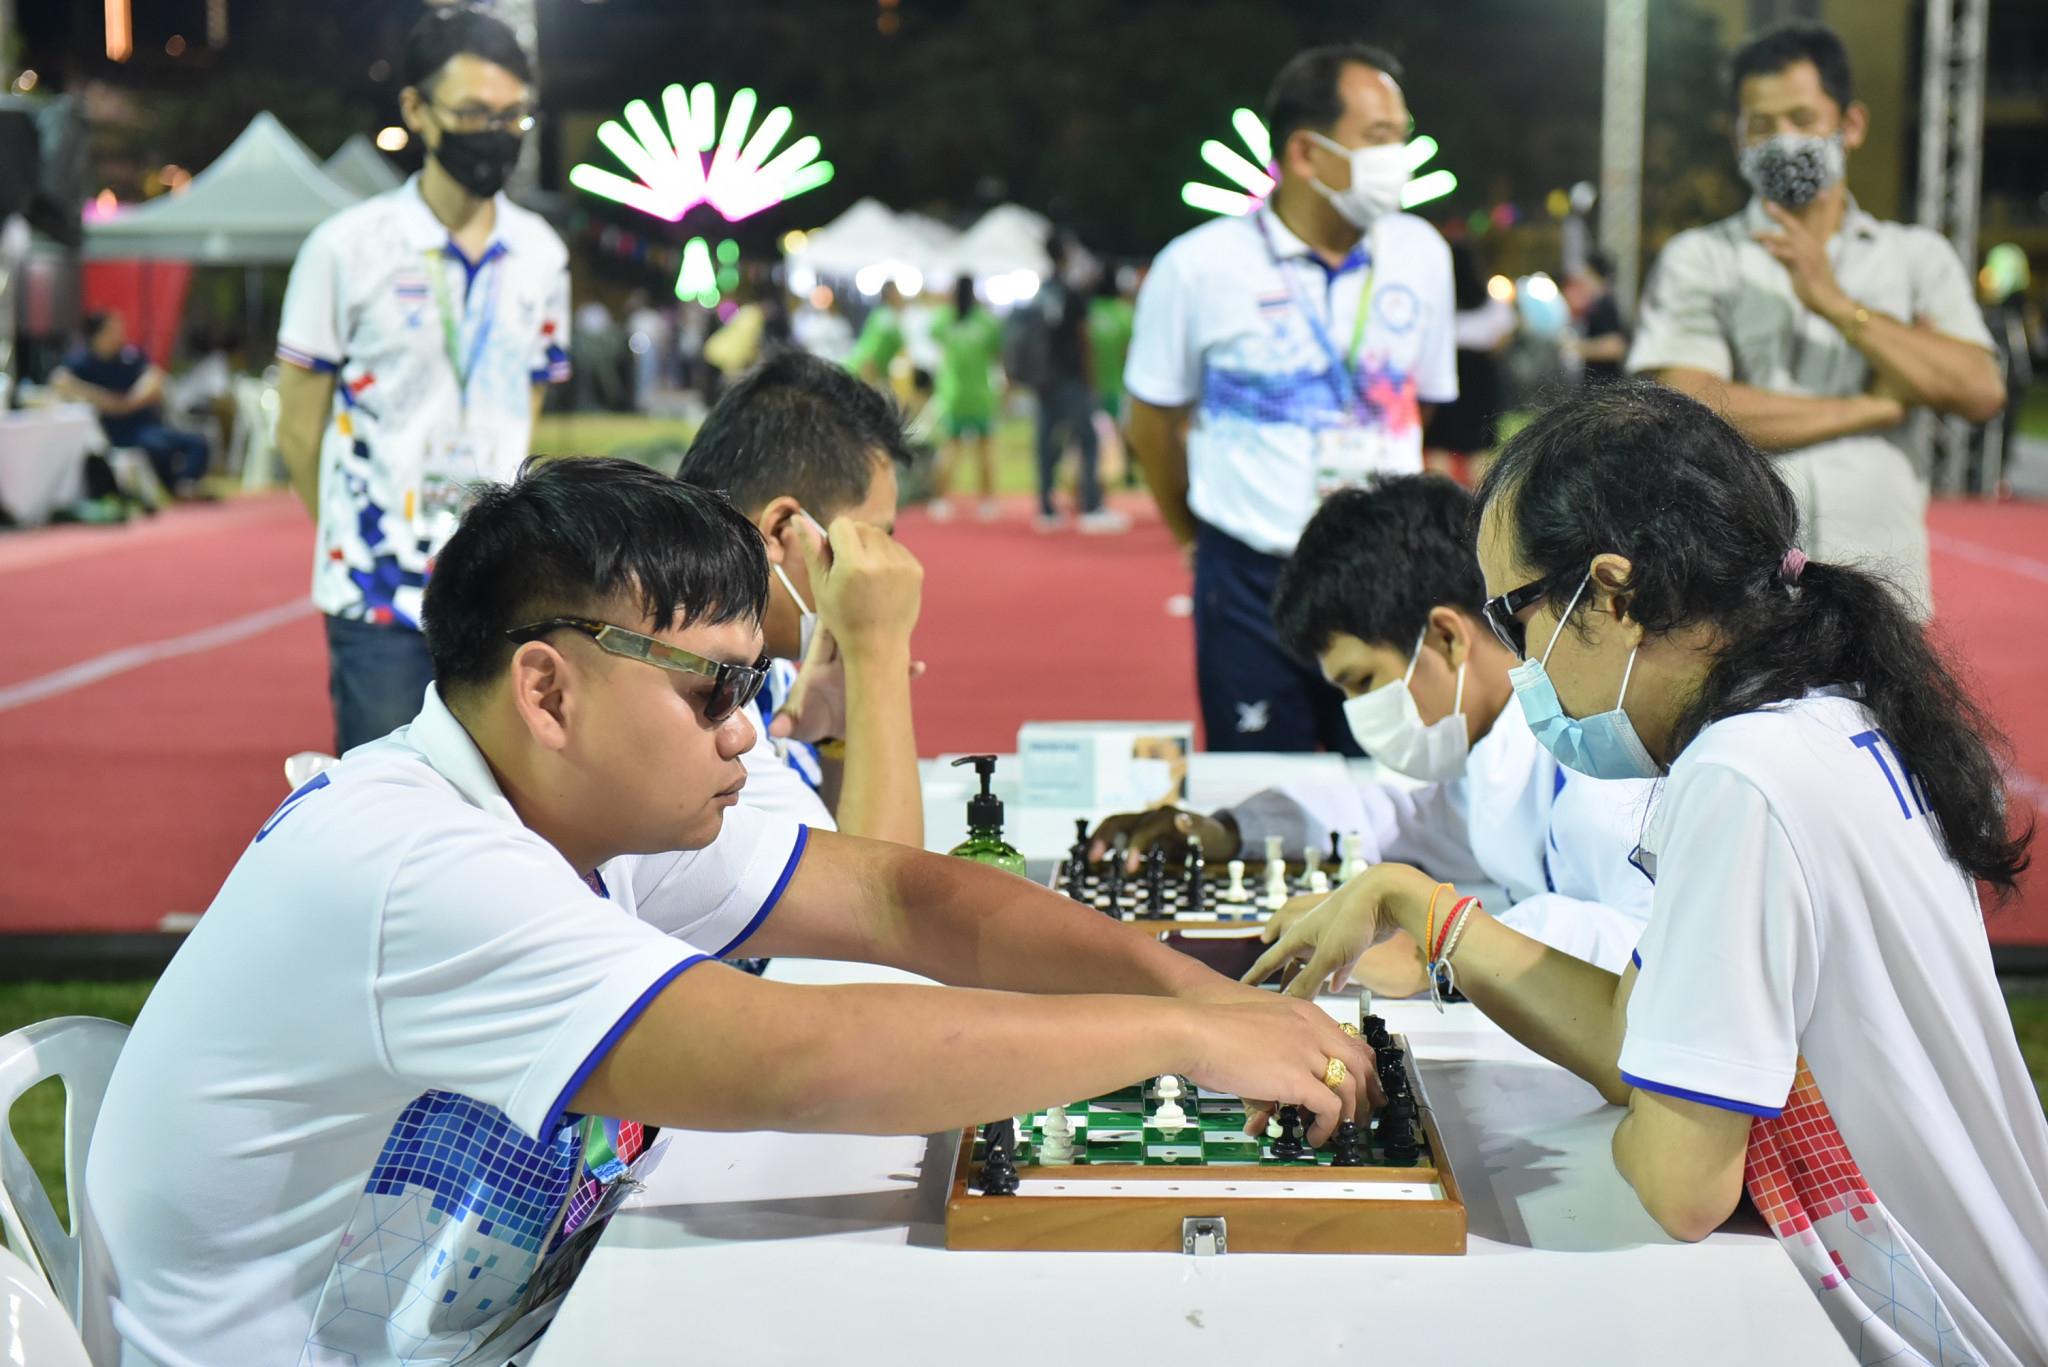 Blind chess was also showcased on day three of the UTS World Youth Festival ©UTS